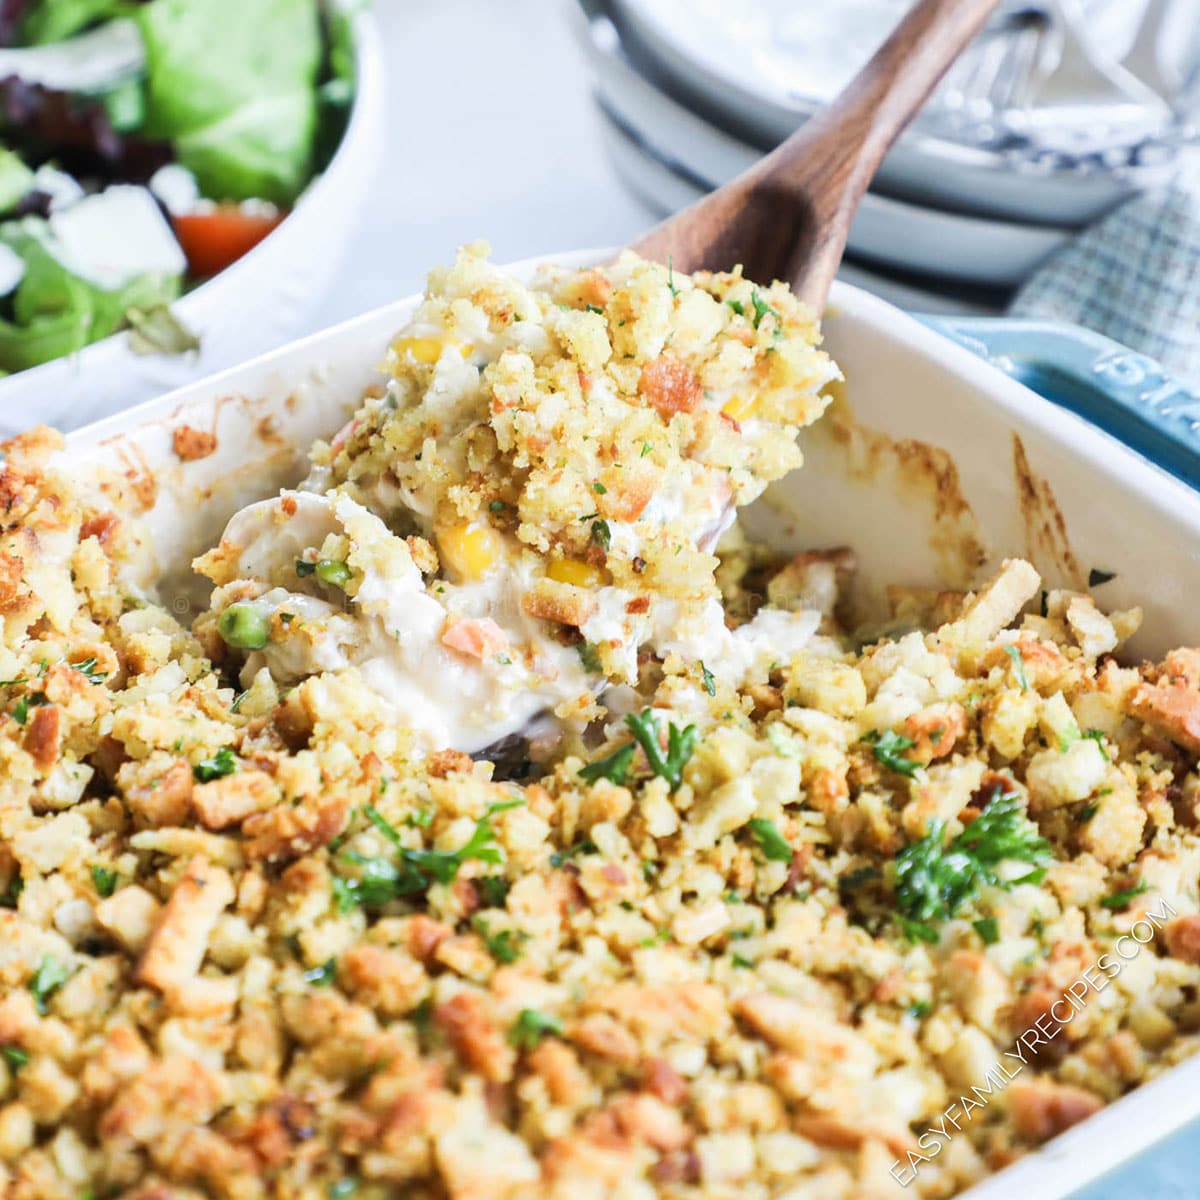 Chicken and Stuffing Casserole with Vegetables